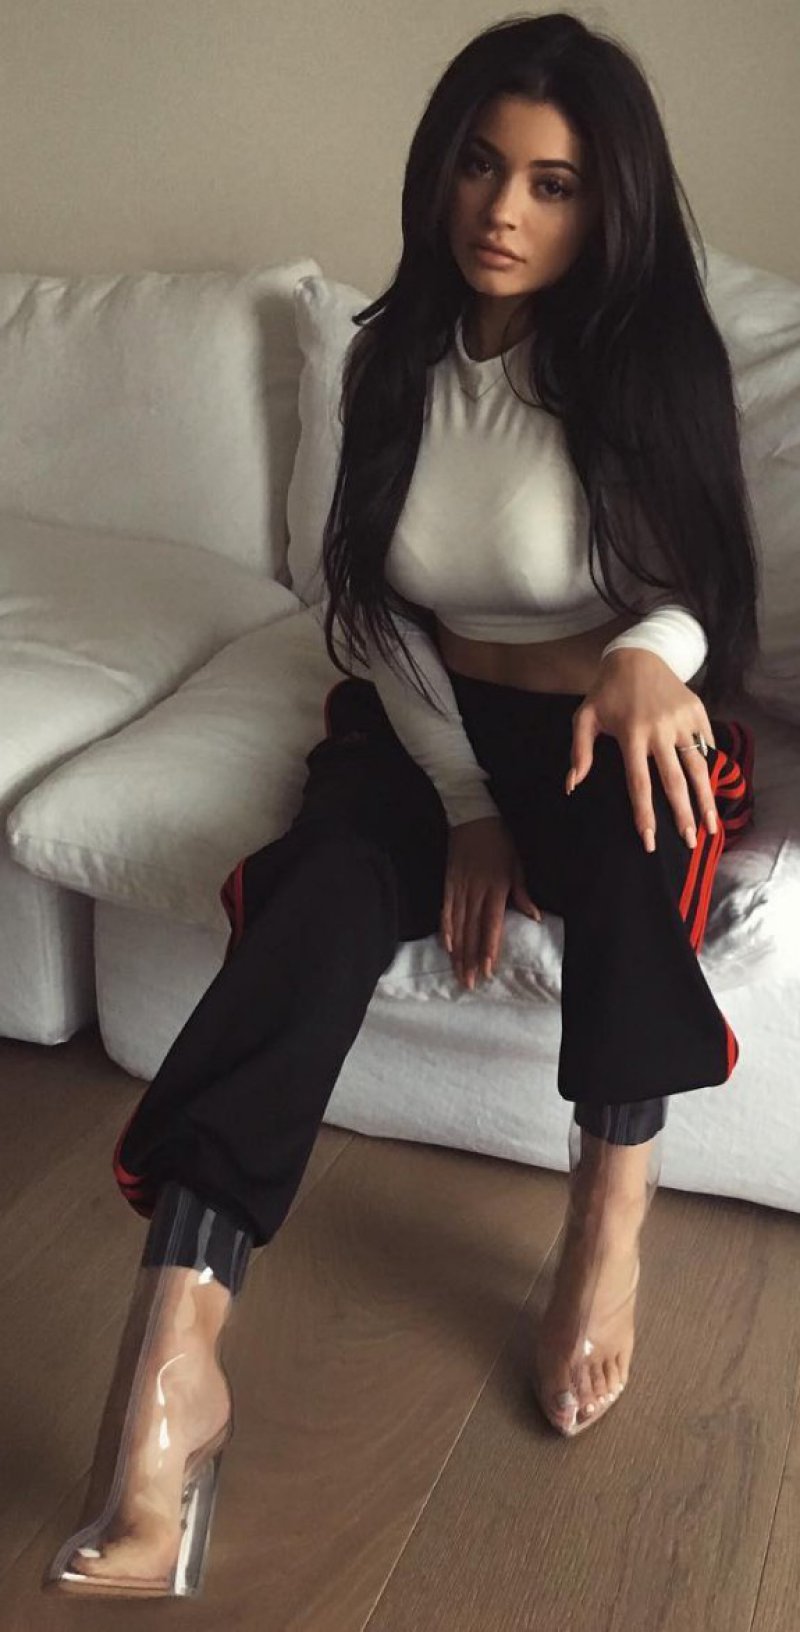 Kylie Jenner's Legs and Feet-23 Sexiest Celebrity Legs And Feet